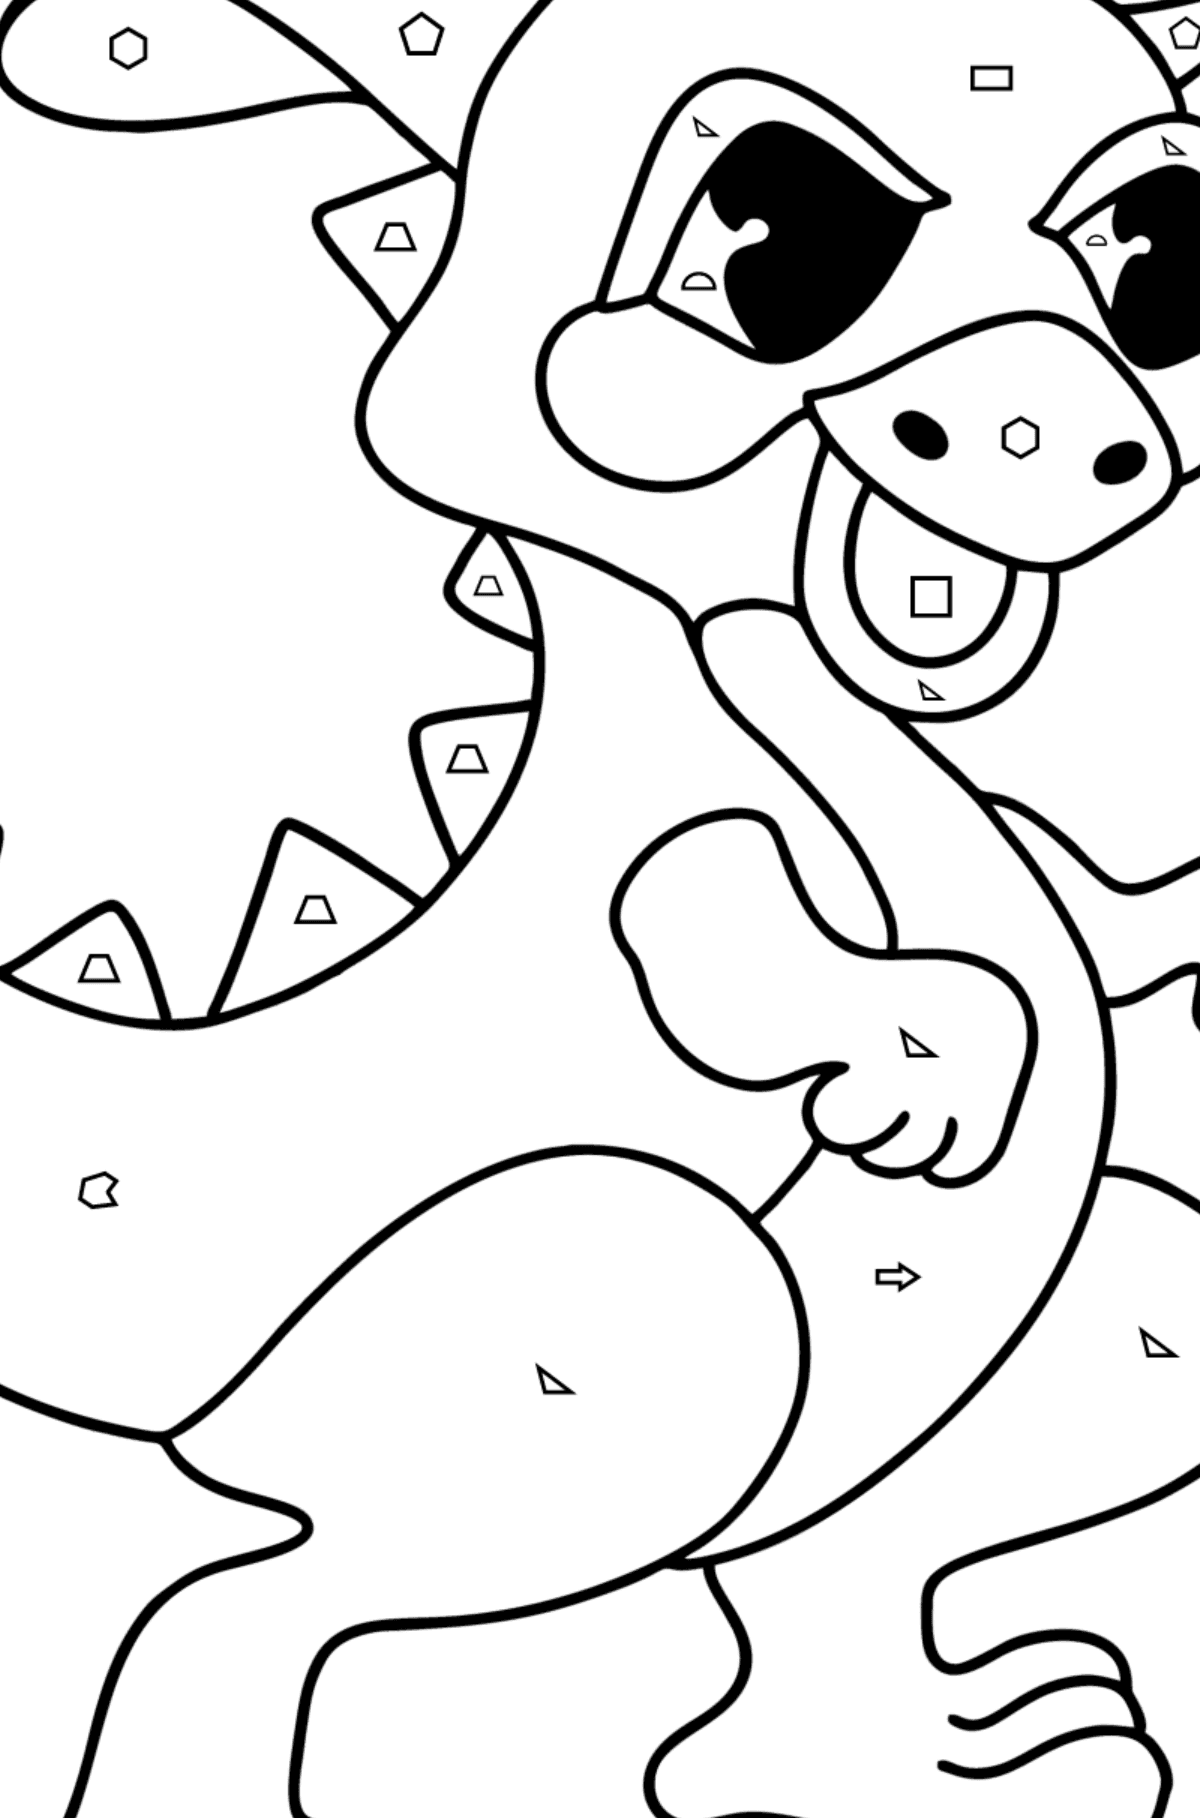 Cartoon dragon coloring page - Coloring by Geometric Shapes for Kids